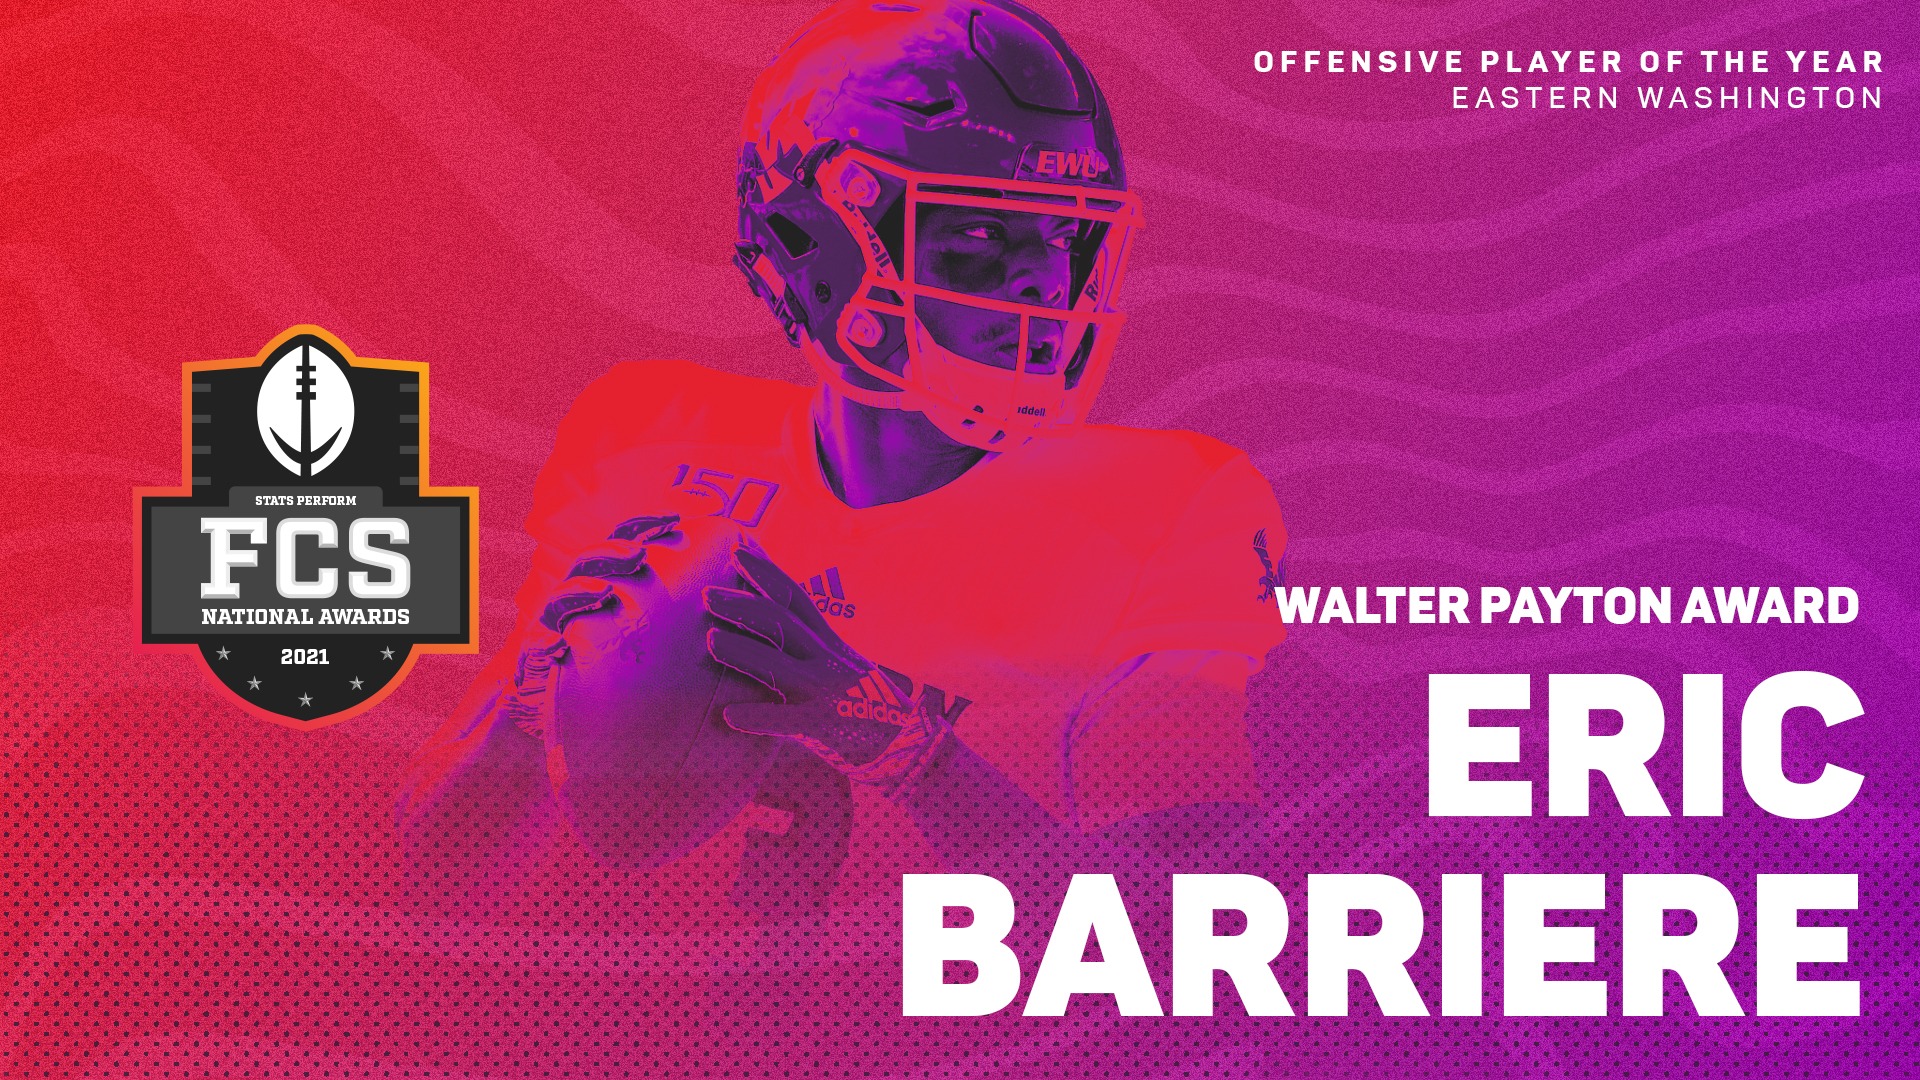 Eastern Washington QB Eric Barriere Receives 2021 Walter Payton Award as FCS Offensive Player of the Year